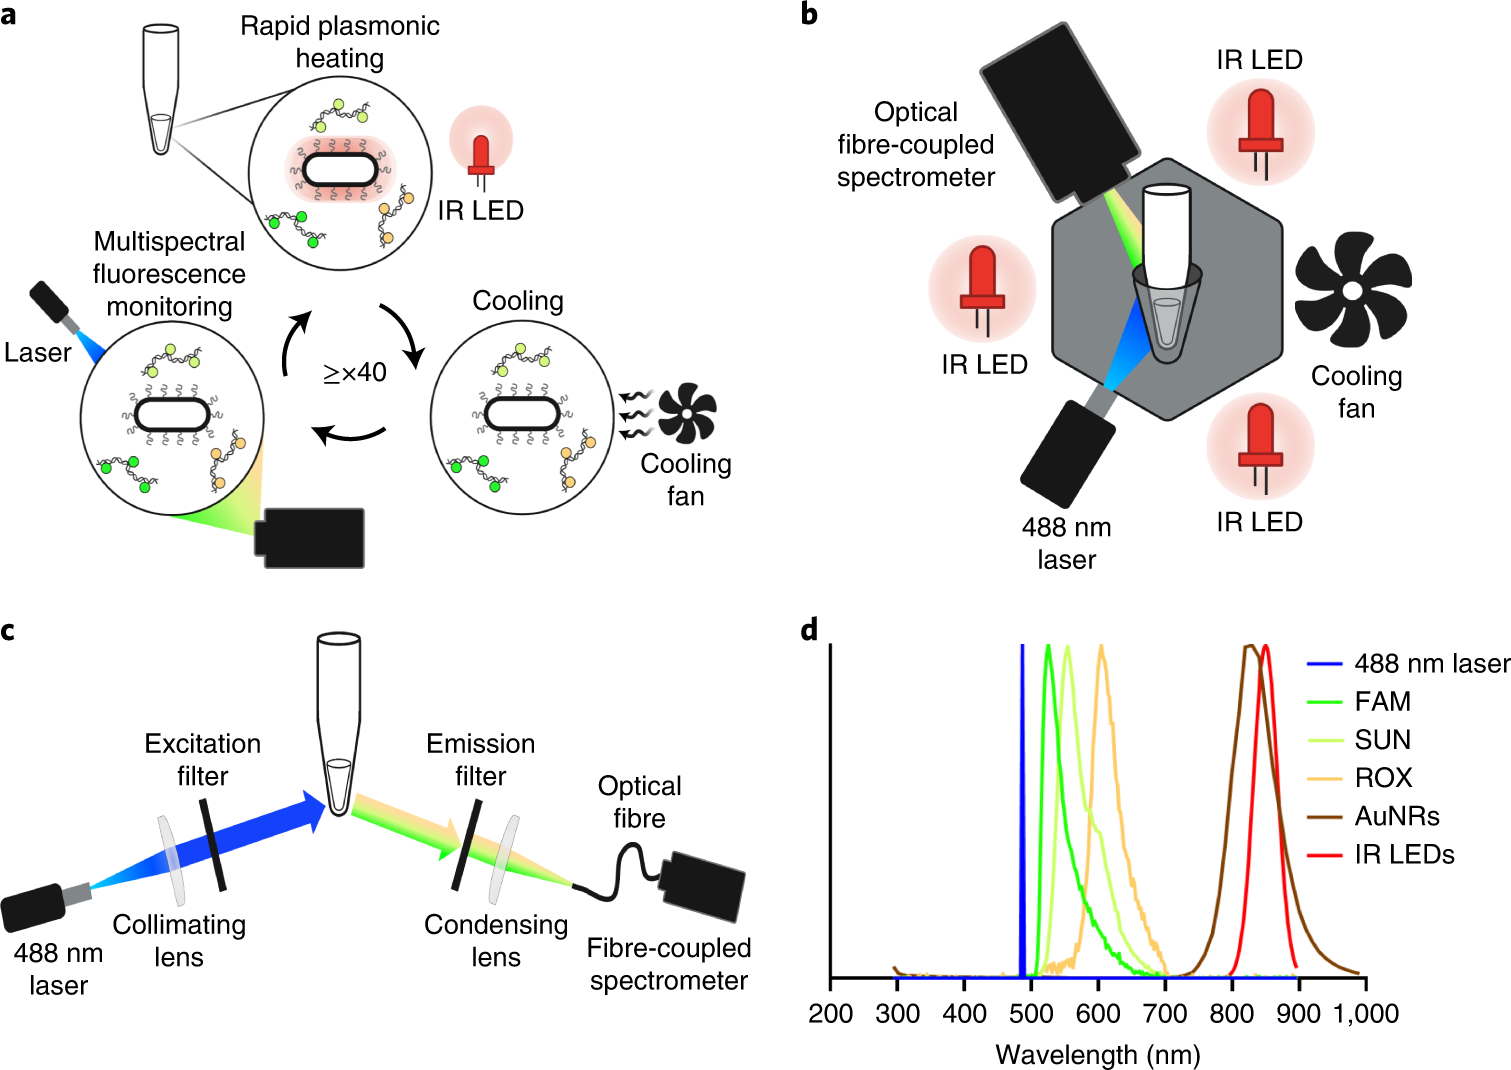 Multiplexed reverse-transcriptase quantitative polymerase chain reaction  using plasmonic nanoparticles for point-of-care COVID-19 diagnosis | Nature  Nanotechnology